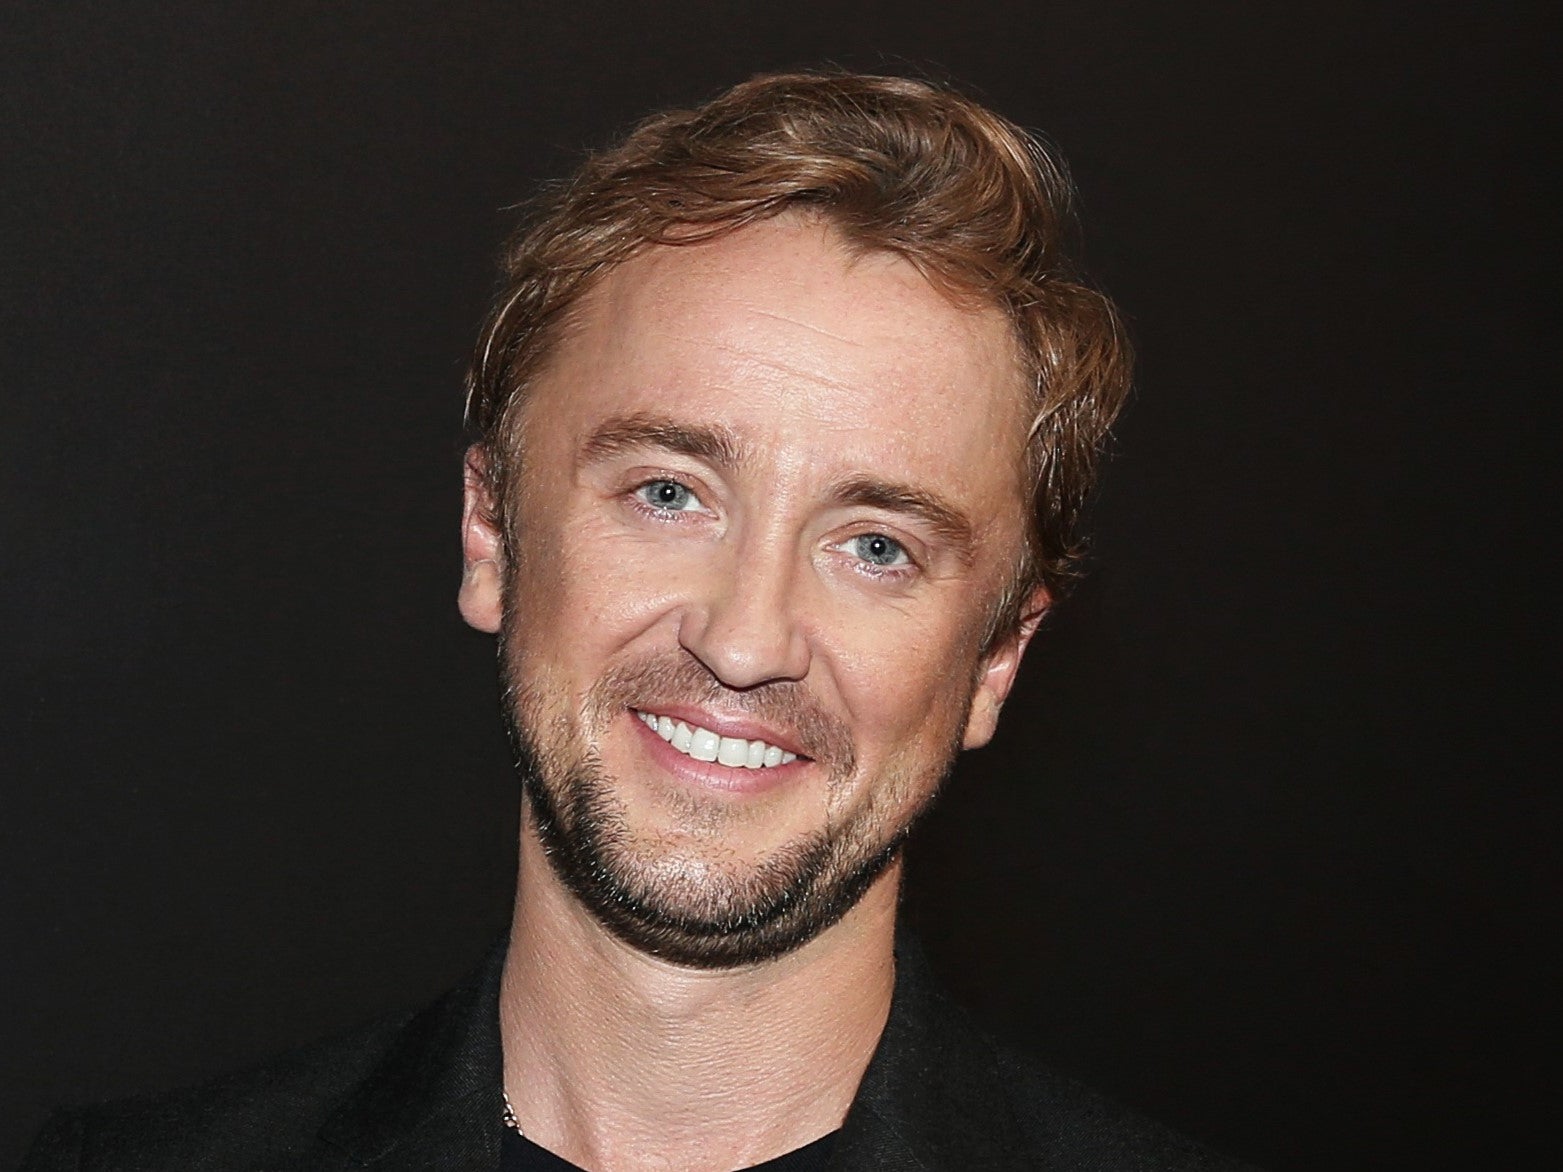 Tom Felton: ‘I’m pro-choice, pro-discussion, pro-human rights across the board, and pro-love'